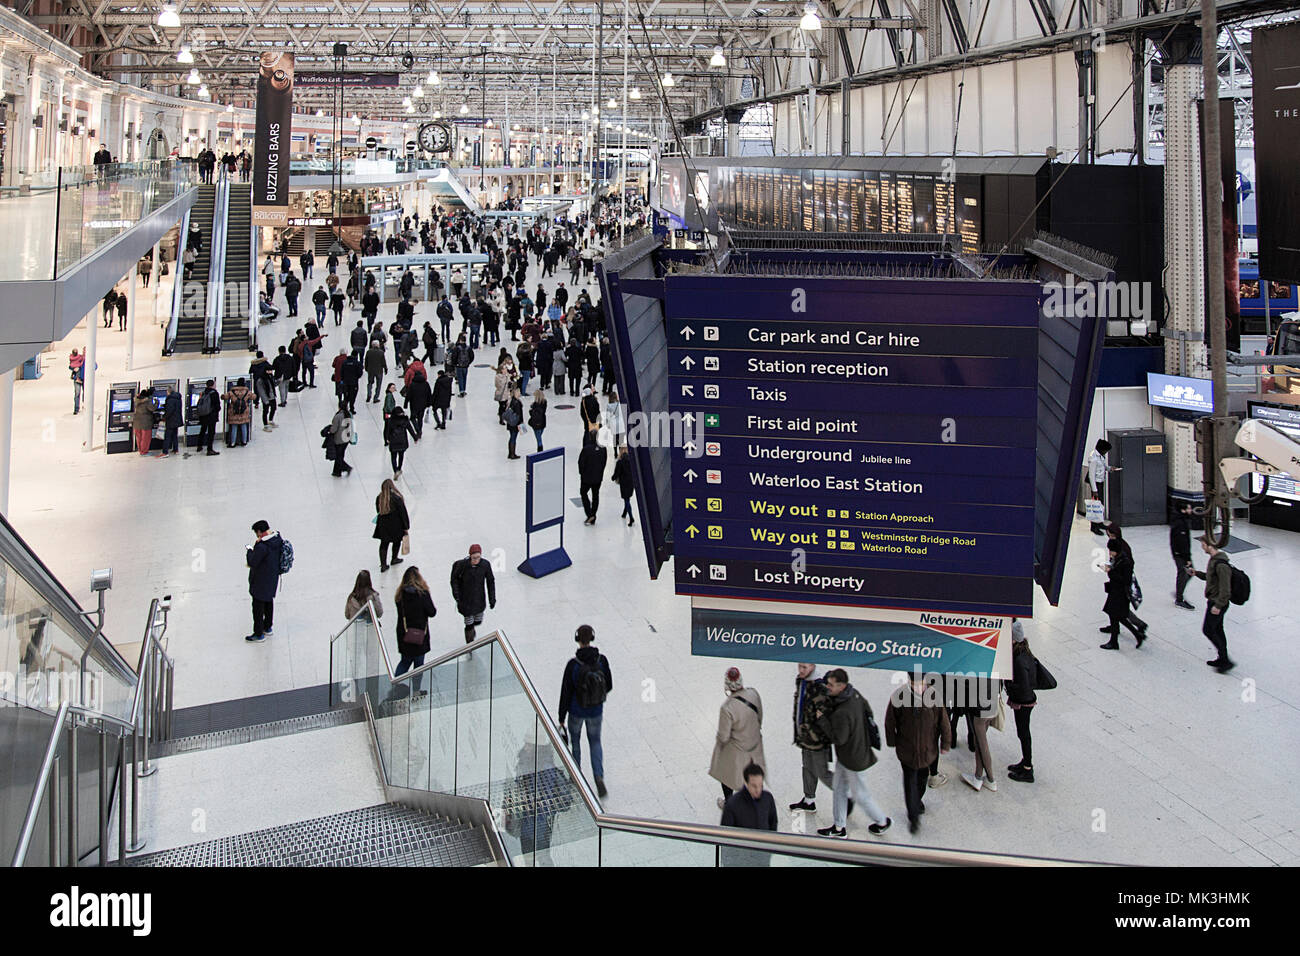 London, UK: February 26, 2018: Waterloo Railway Station is a central London terminus on the National Rail network located in the Borough of Lambeth. Stock Photo